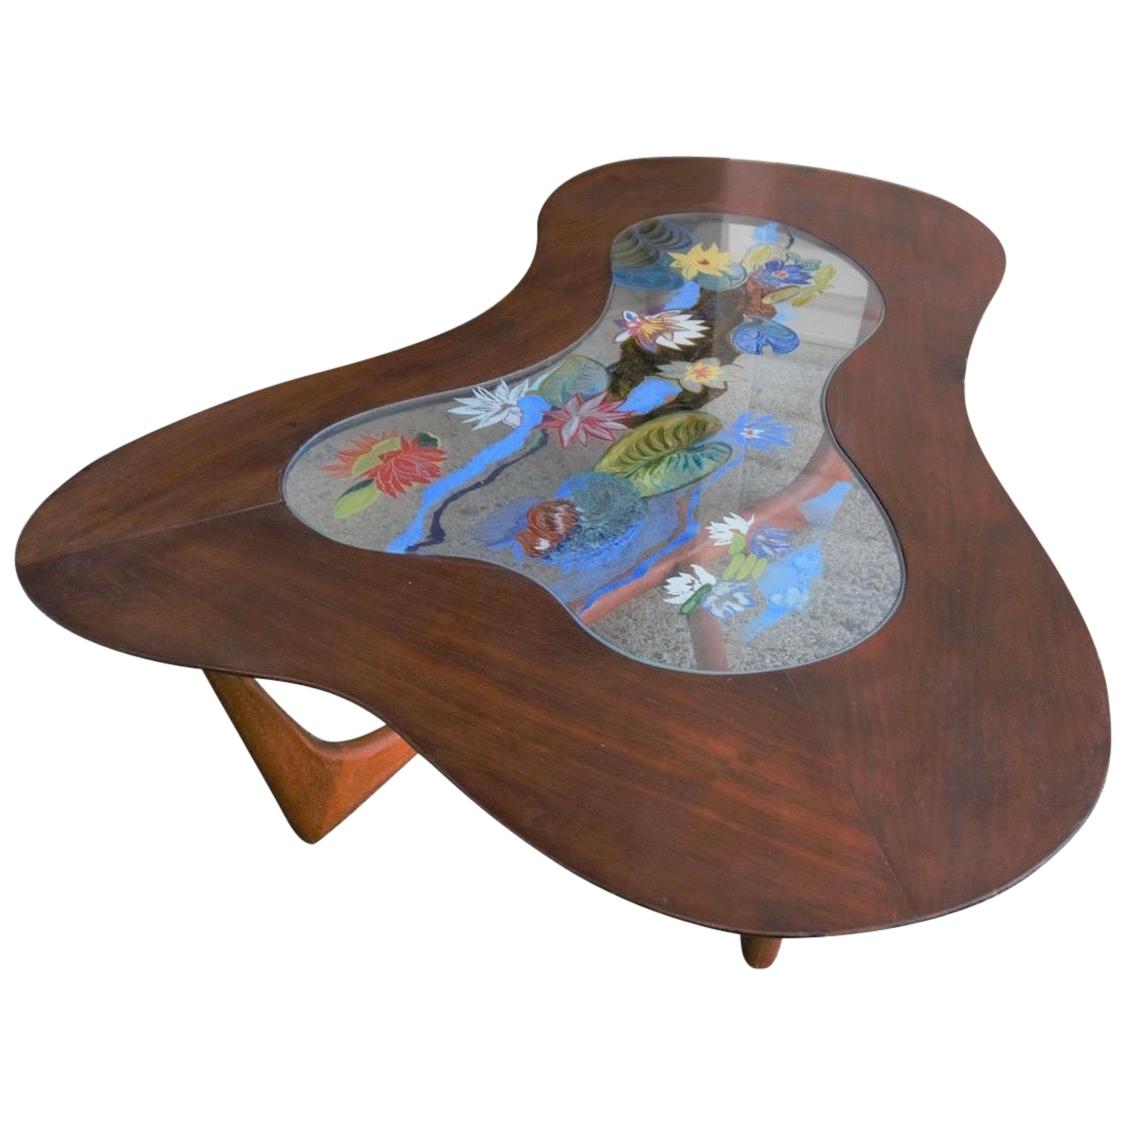 Erno Fabry Mid-Century Modern Biomorphic Walnut and Glass Cocktail Coffee Table